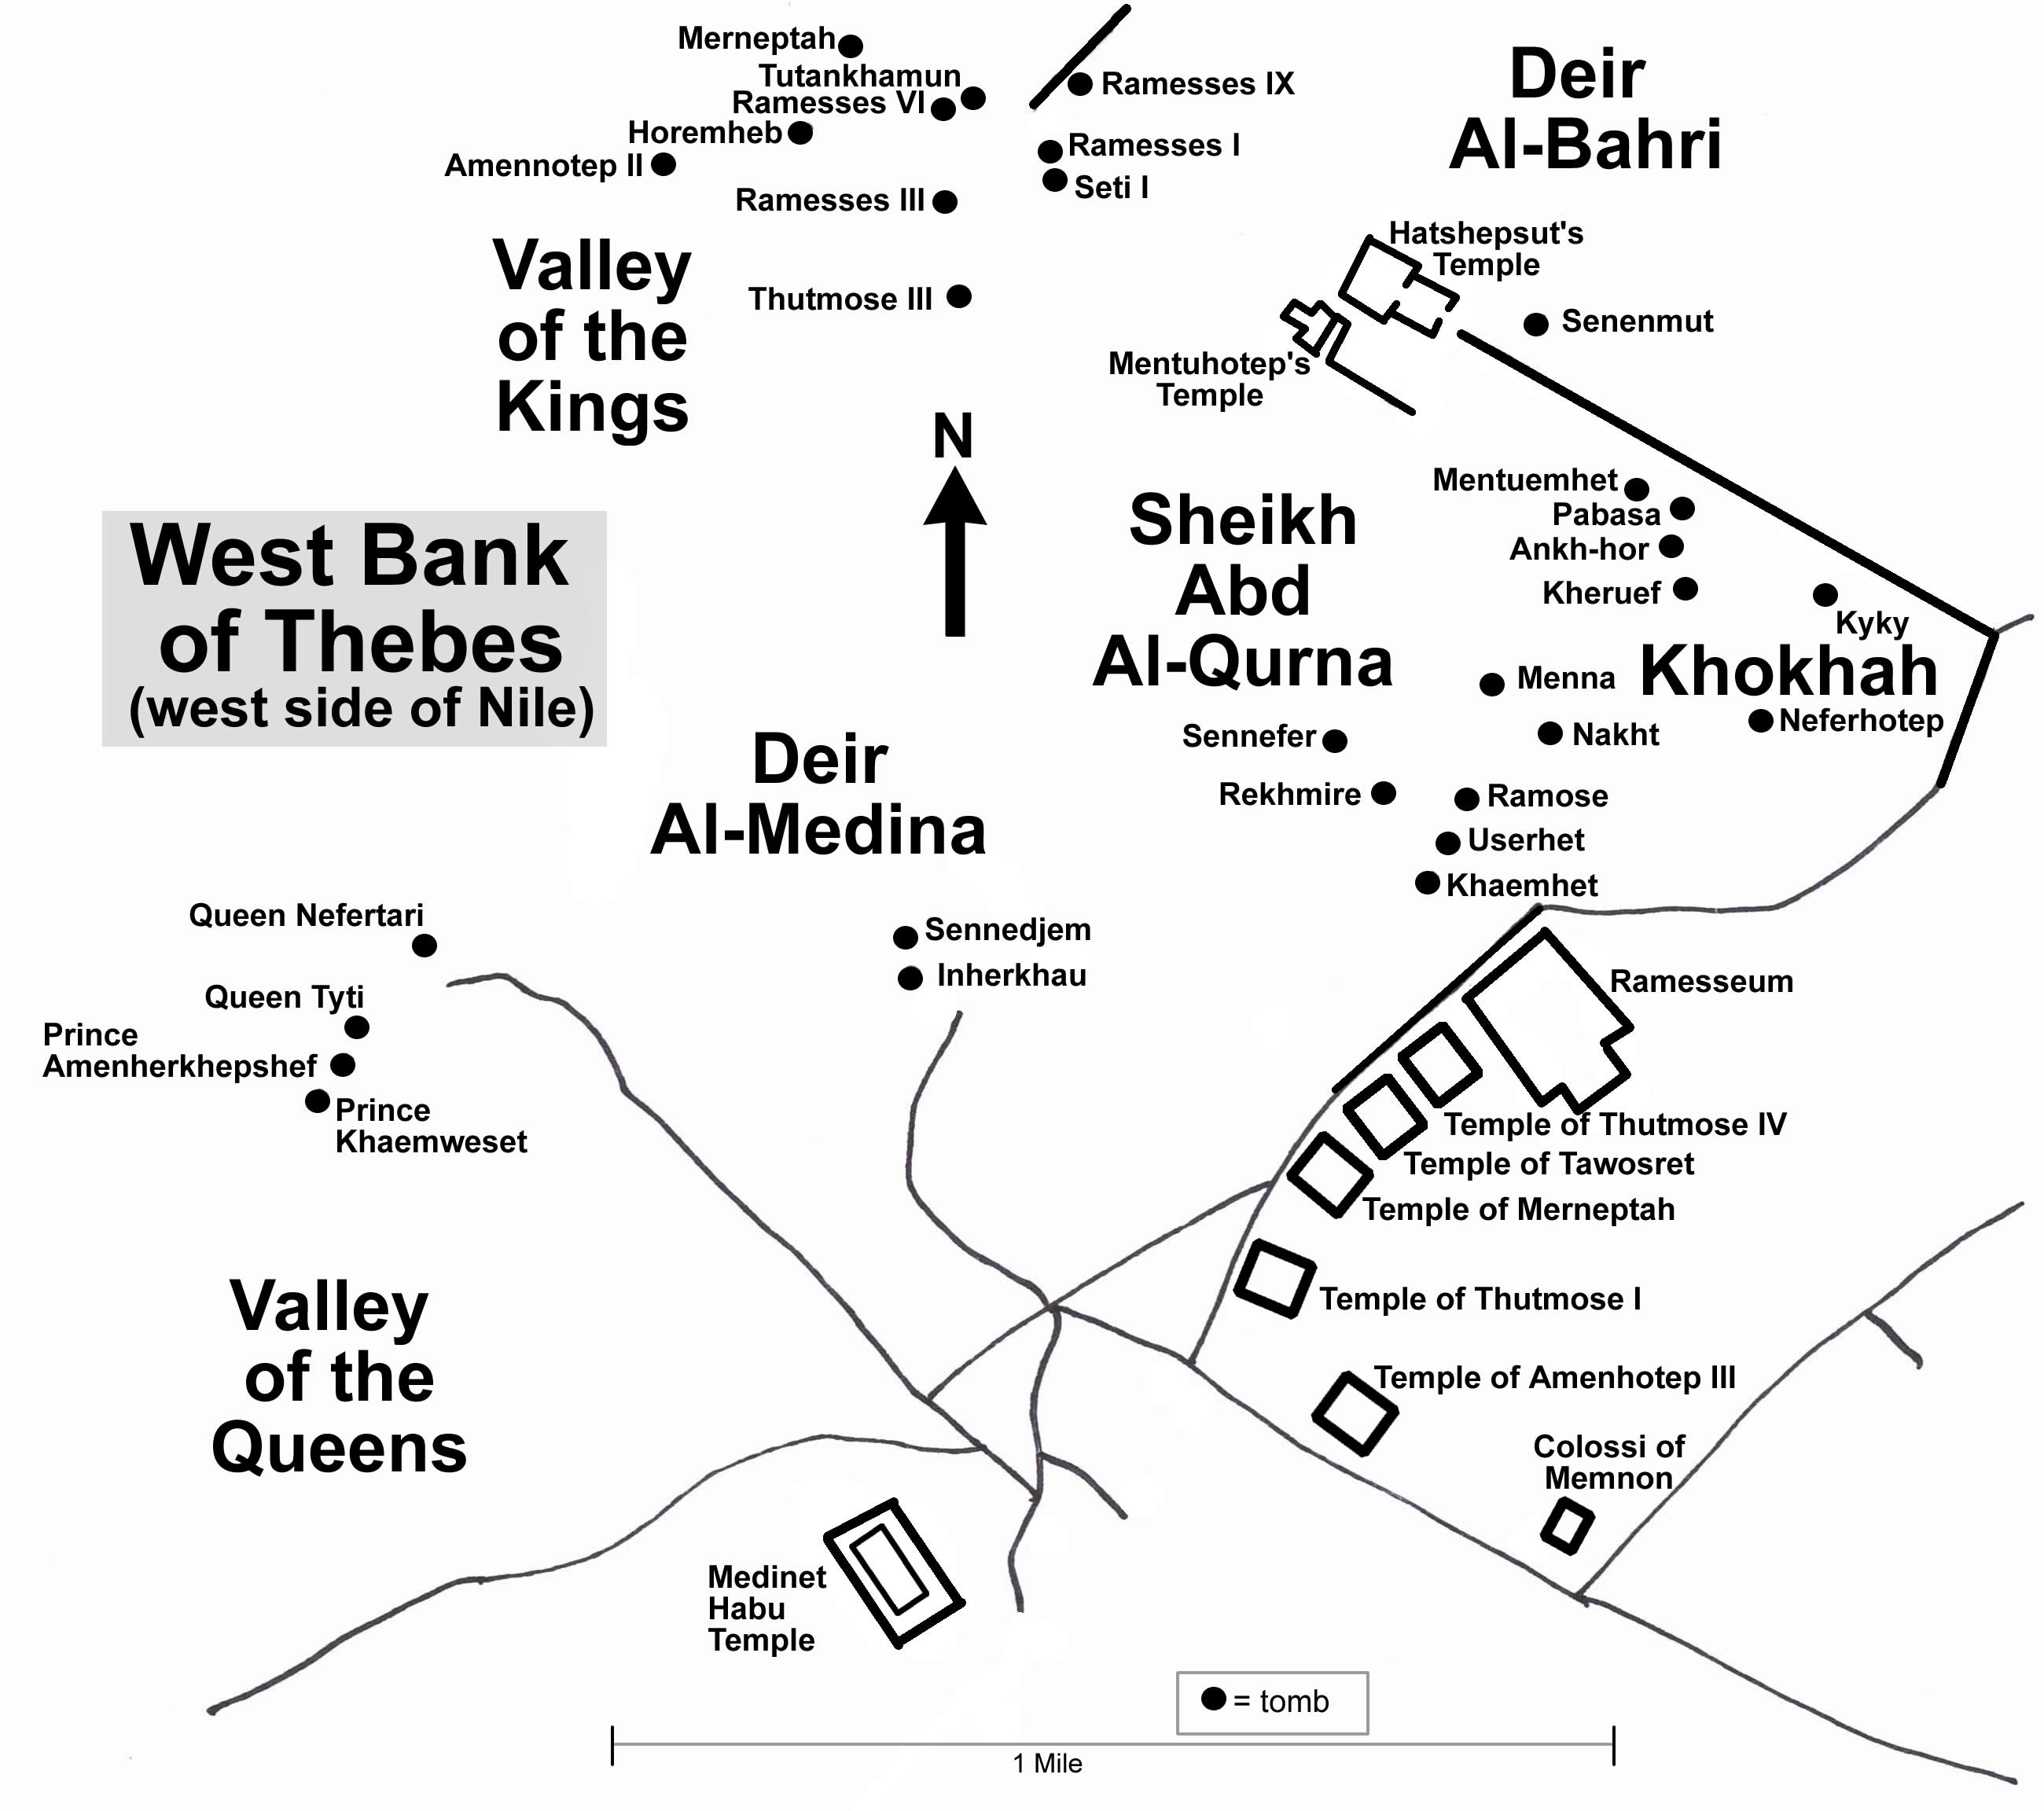 222K West Bank of Thebes on Nile Valley of the Kings